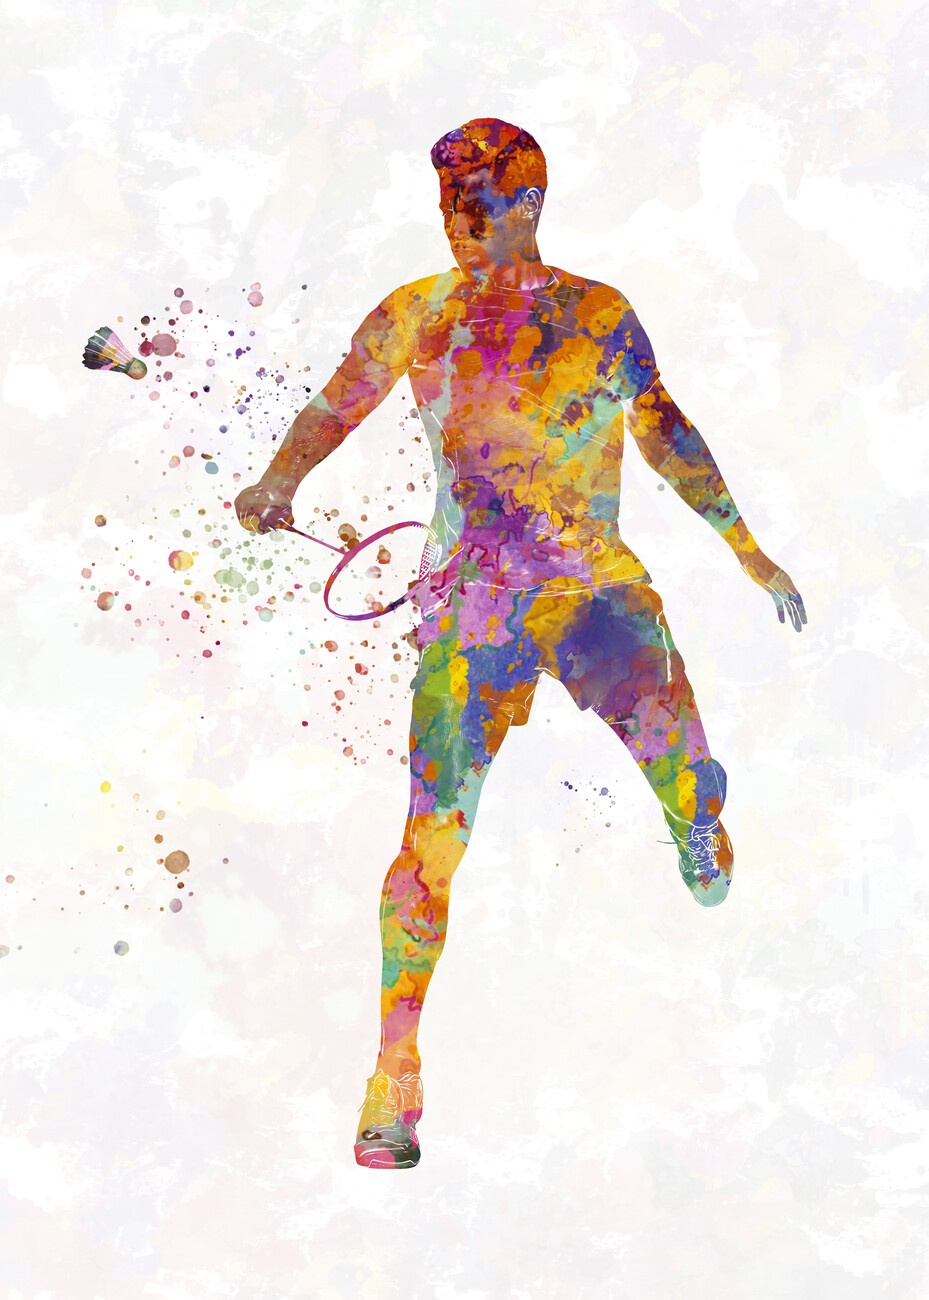 Badminton player in watercolor Wall Mural Buy online at Europosters